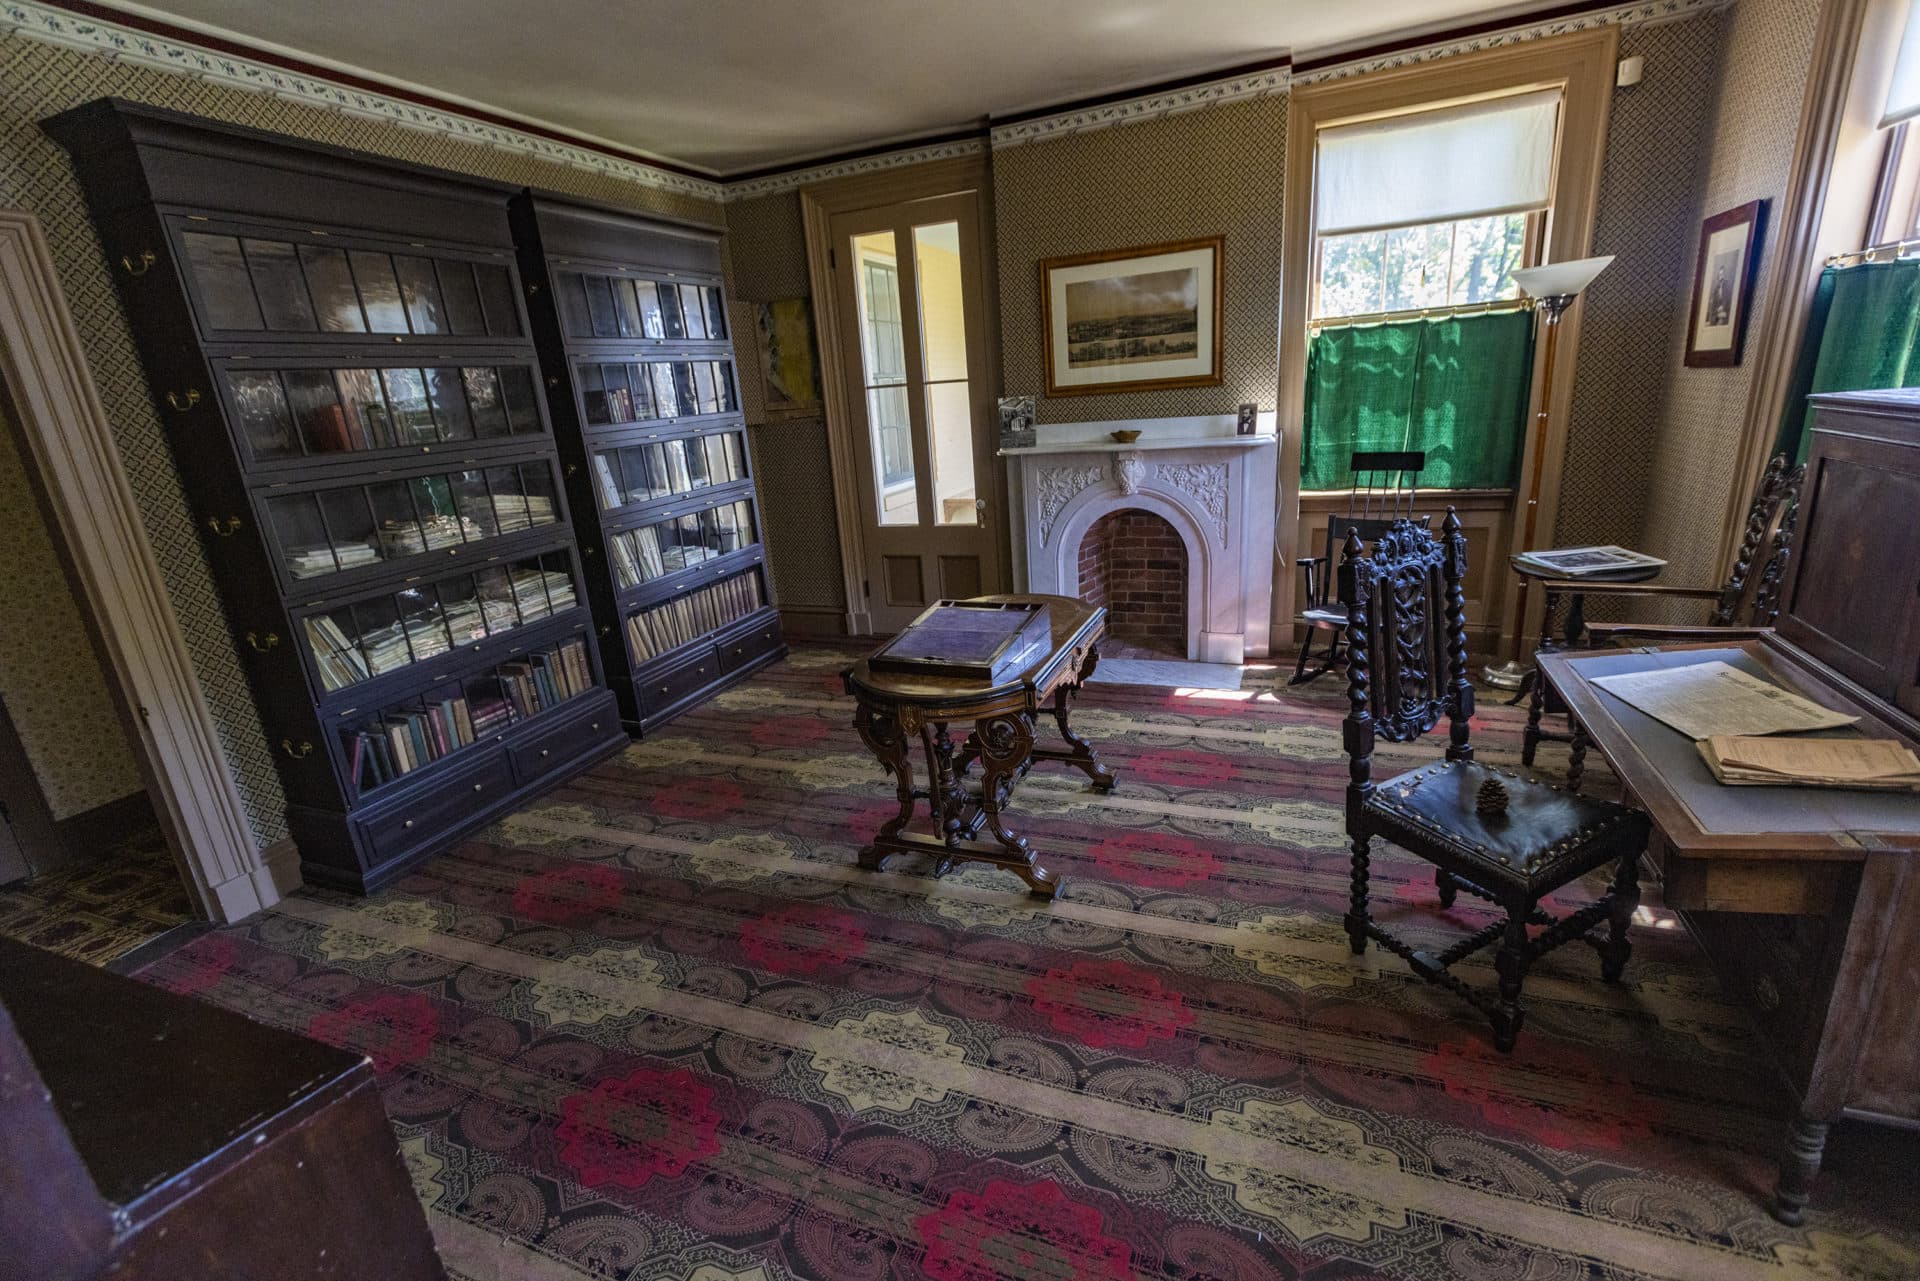 The study at Emily Dickinson's home-museum looks more alive with the bookcases and paper used on set while filming the Apple TV+ series.  (Jesse Costa/WBUR)